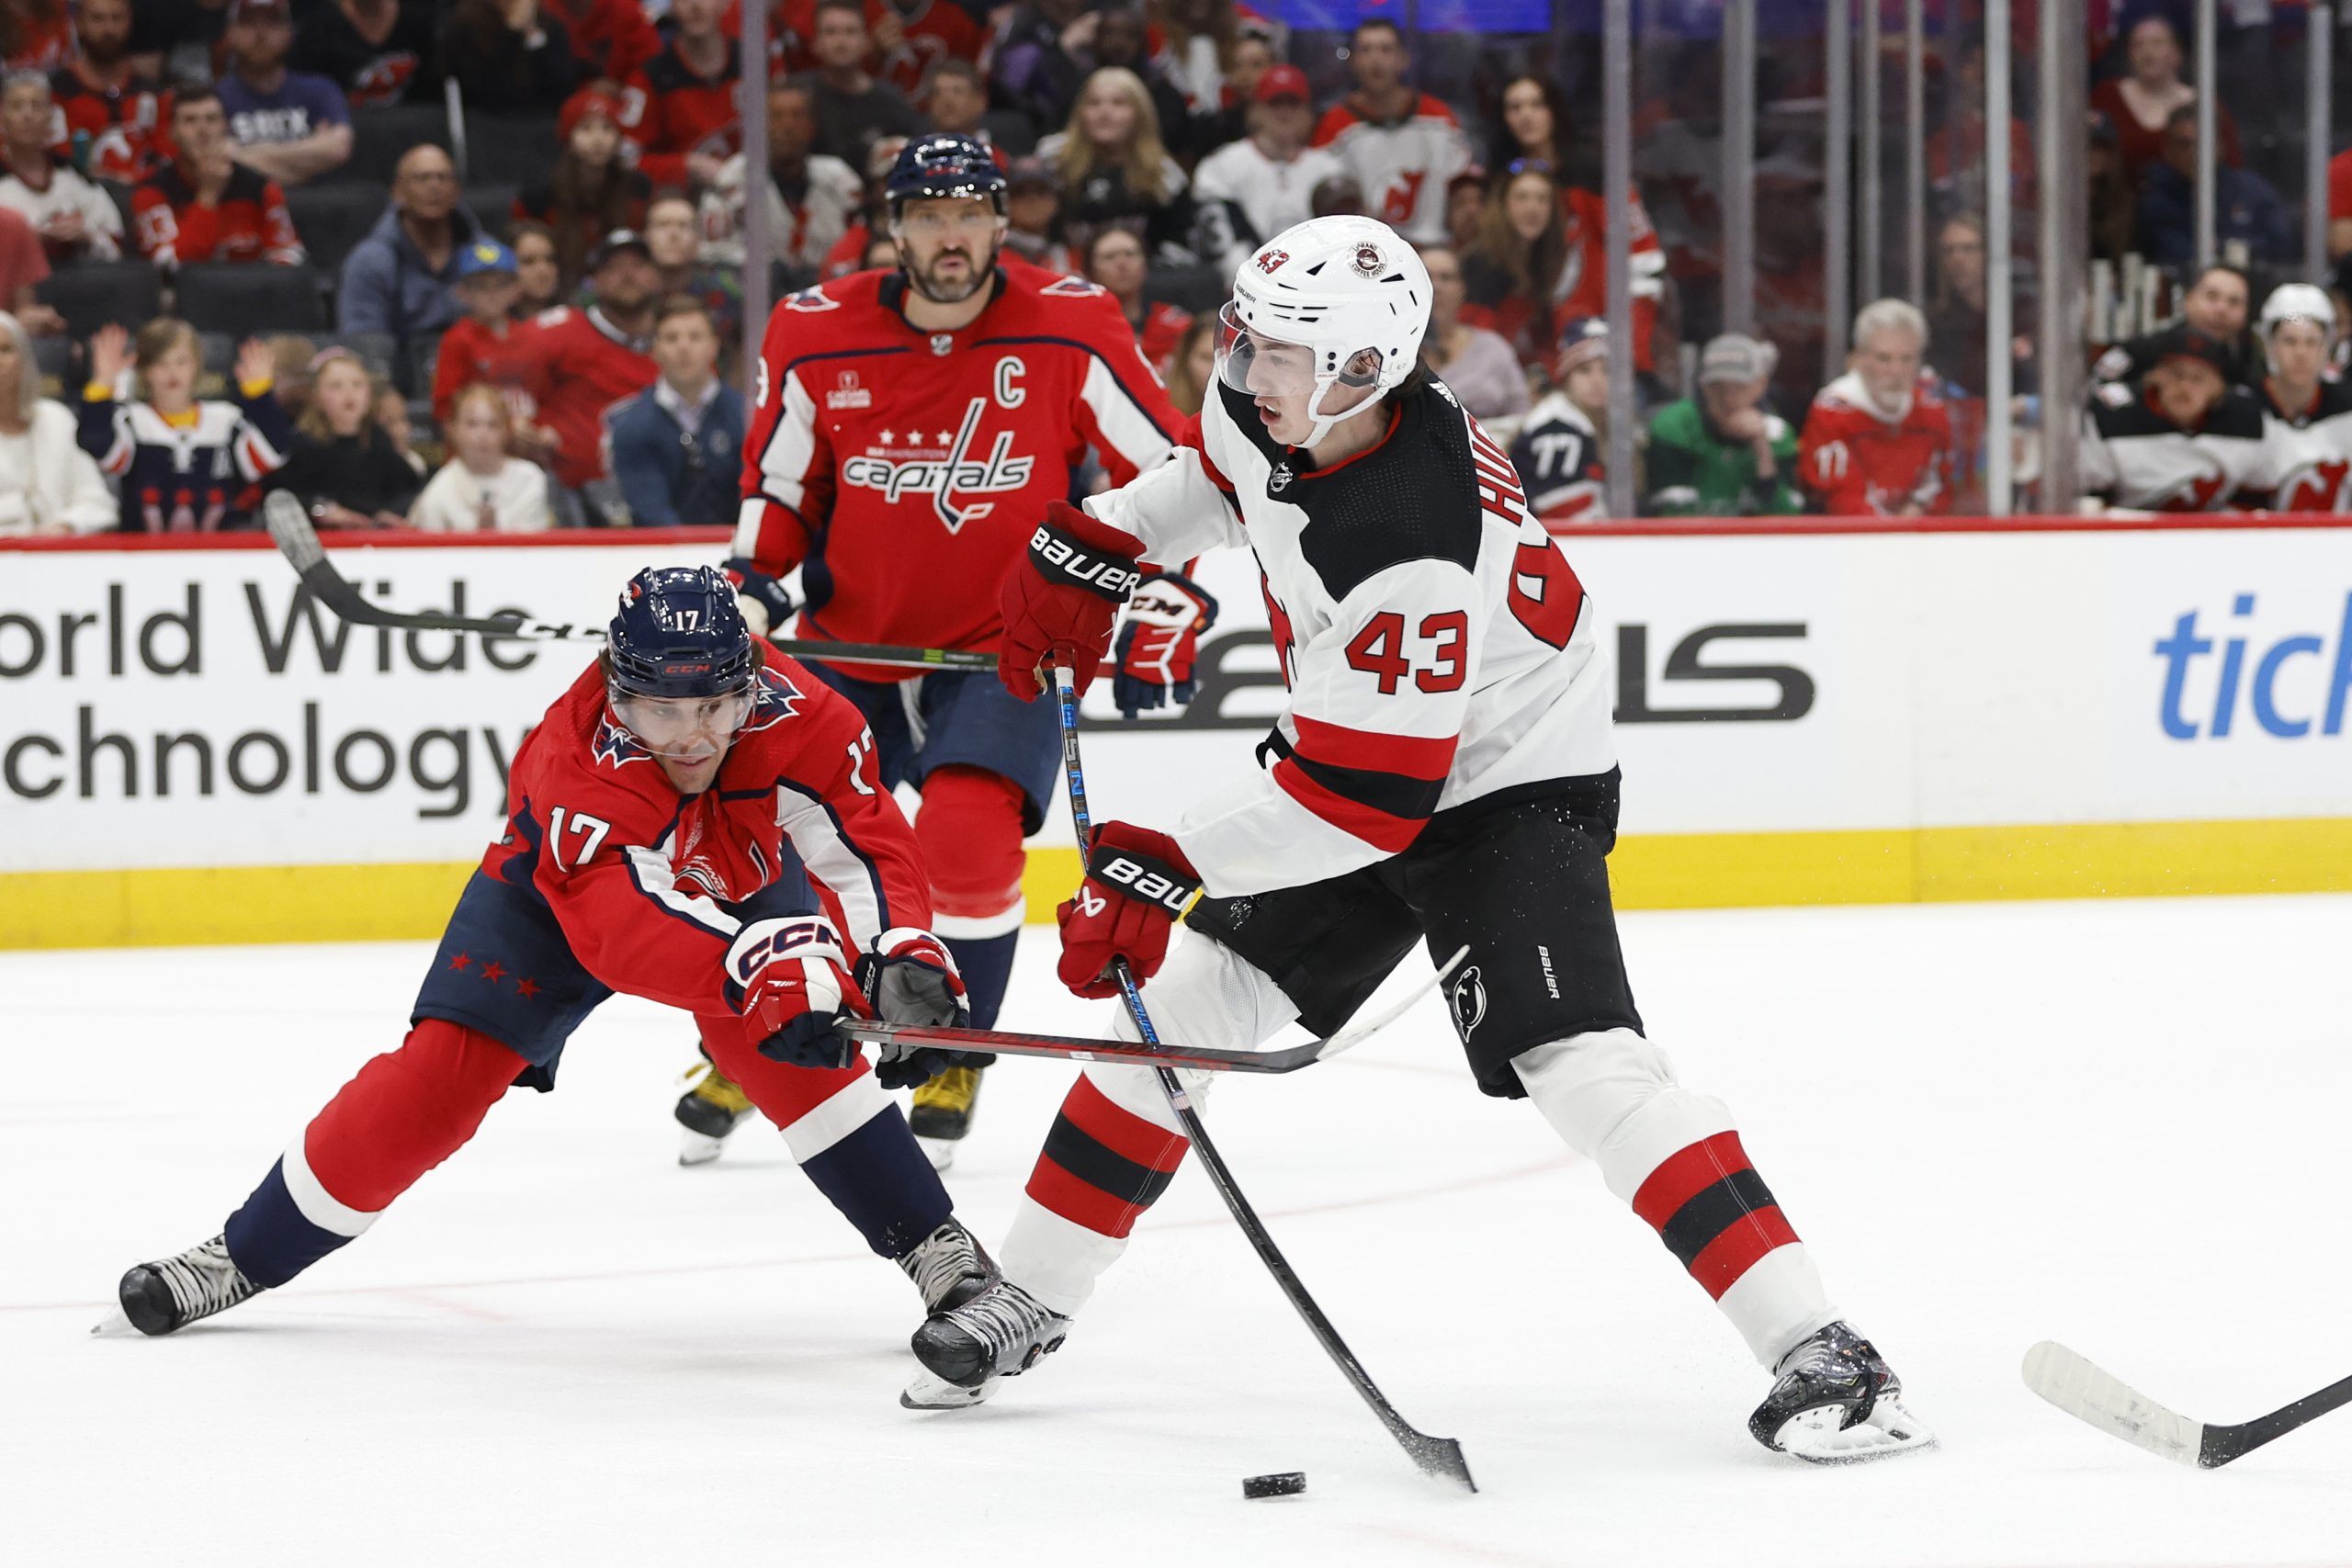 Luke Hughes made his NHL debut with the New Jersey Devils on